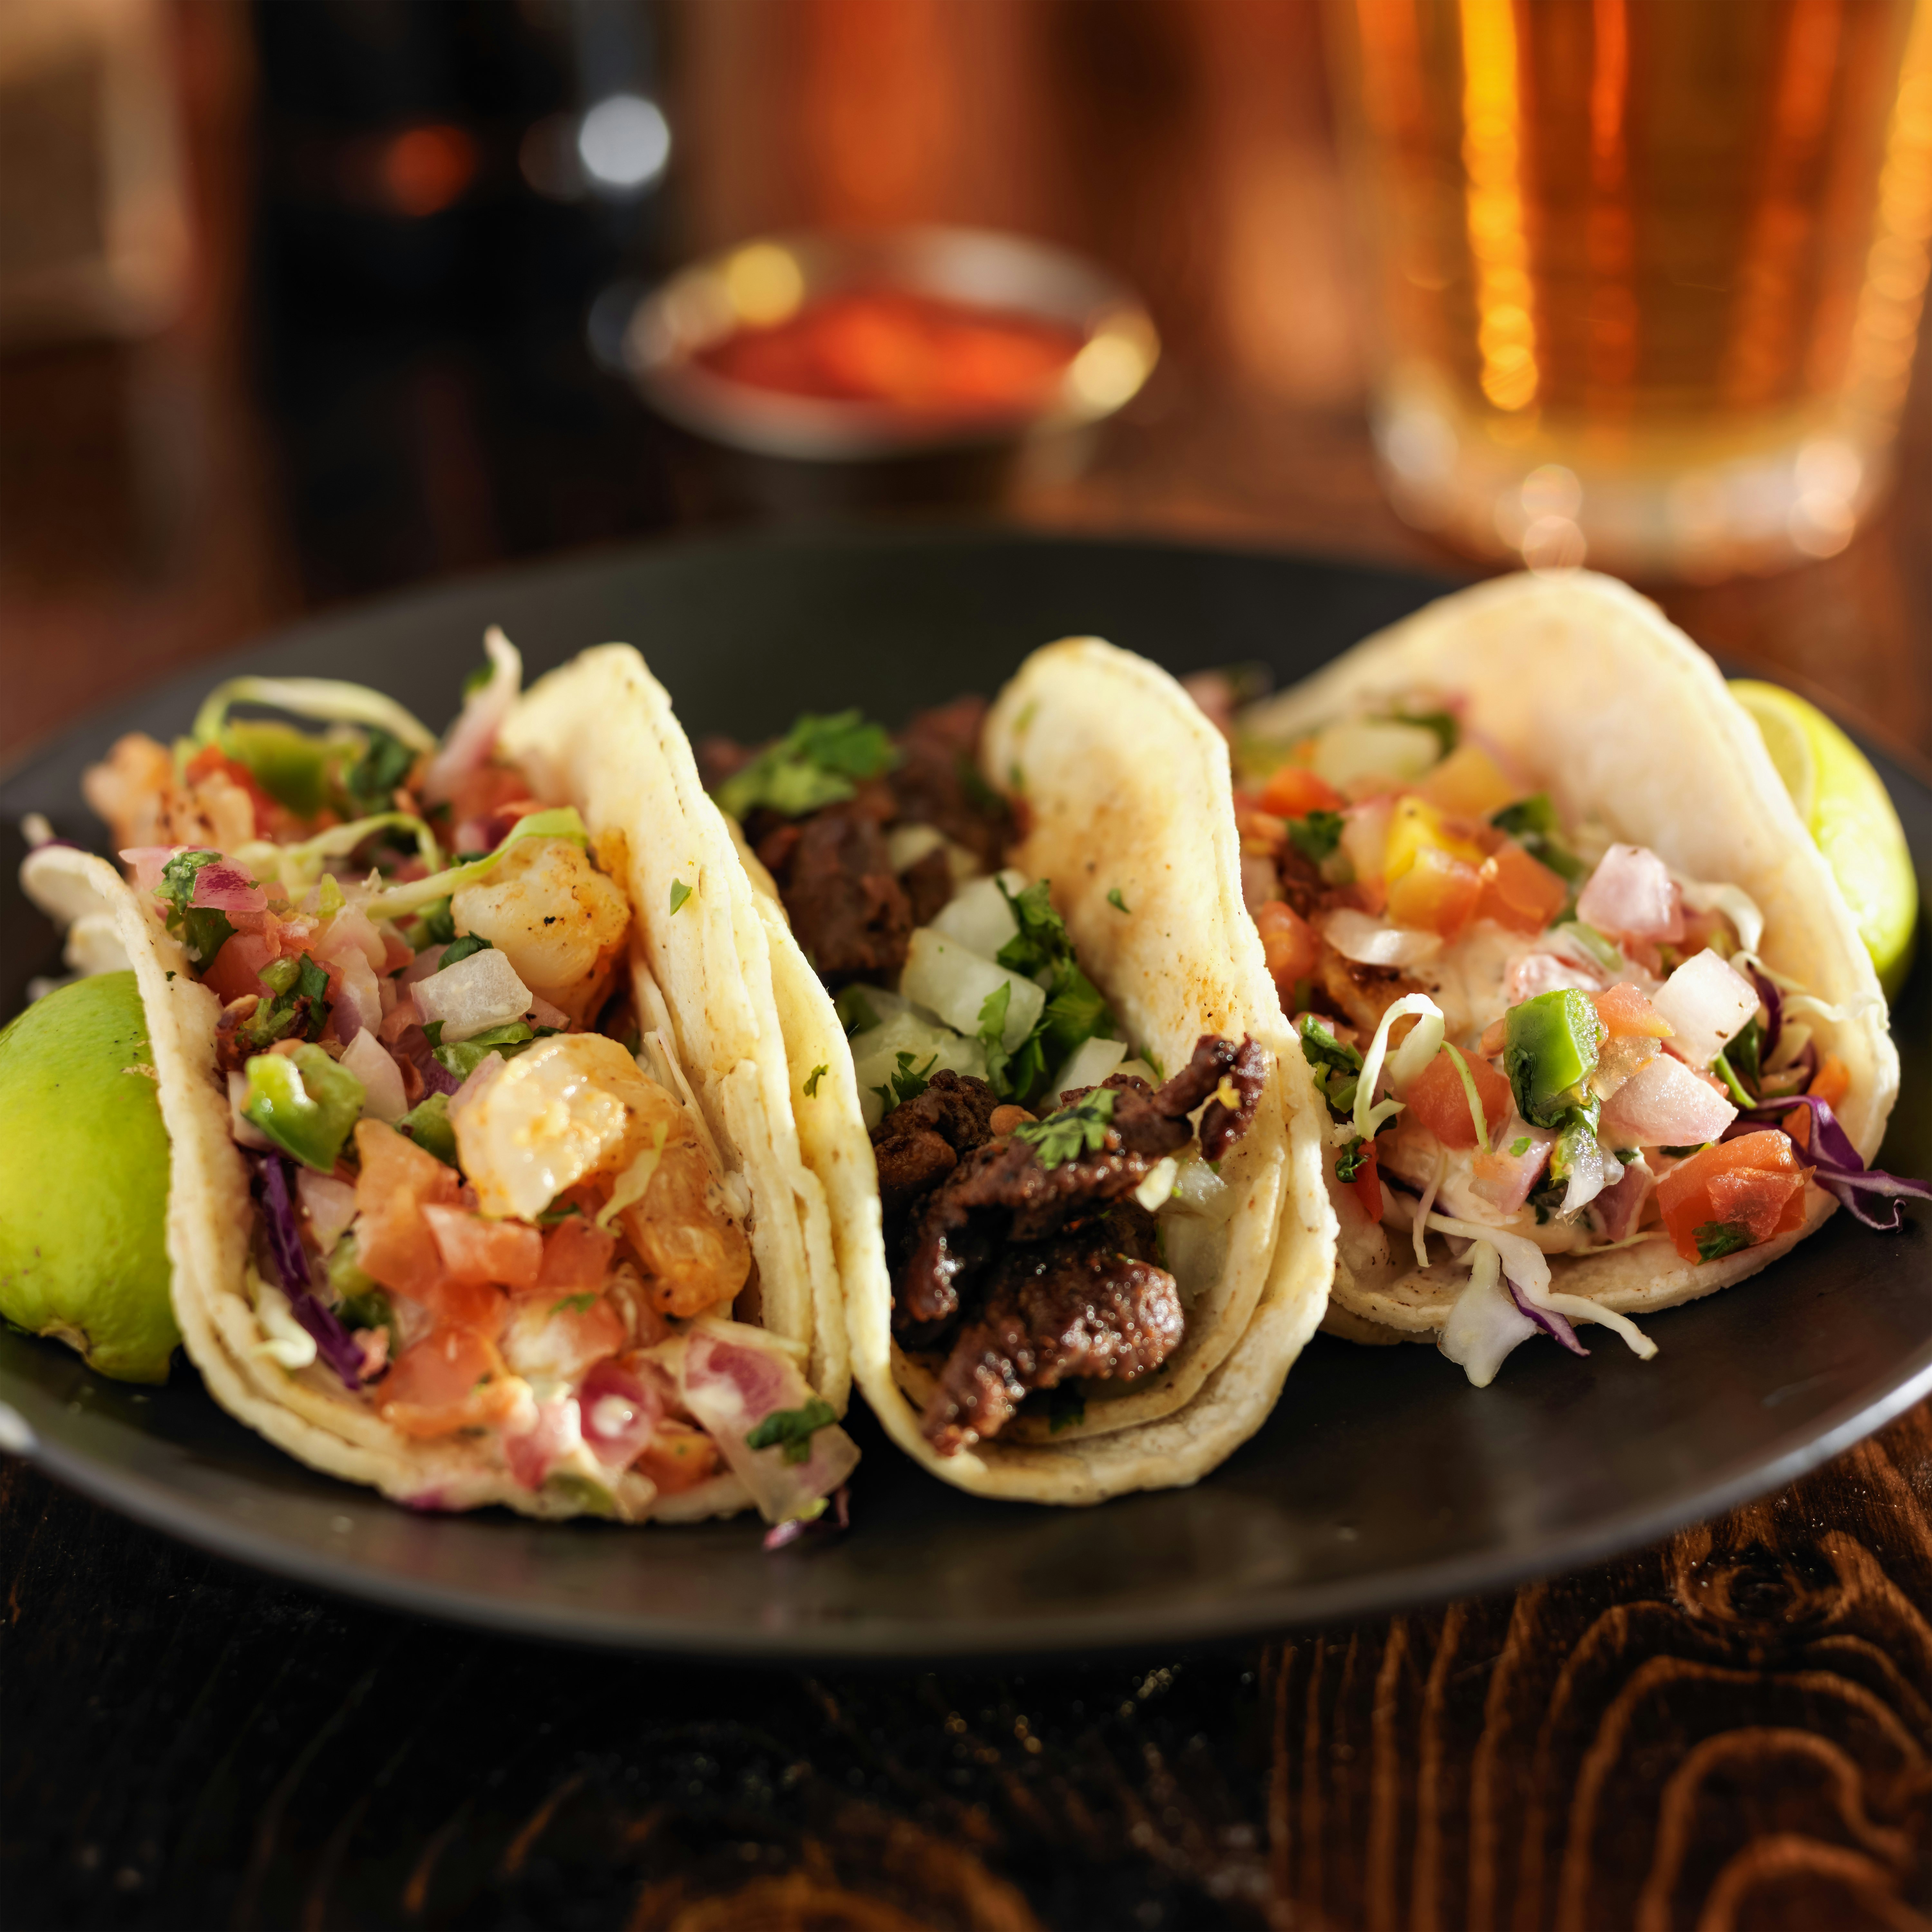 A trio of soft-shell tacos each individually filled with shrimp, steak and fish and topped with onions, cilantro and tomatoes. There is a pair of sliced limes on each side of the plate.